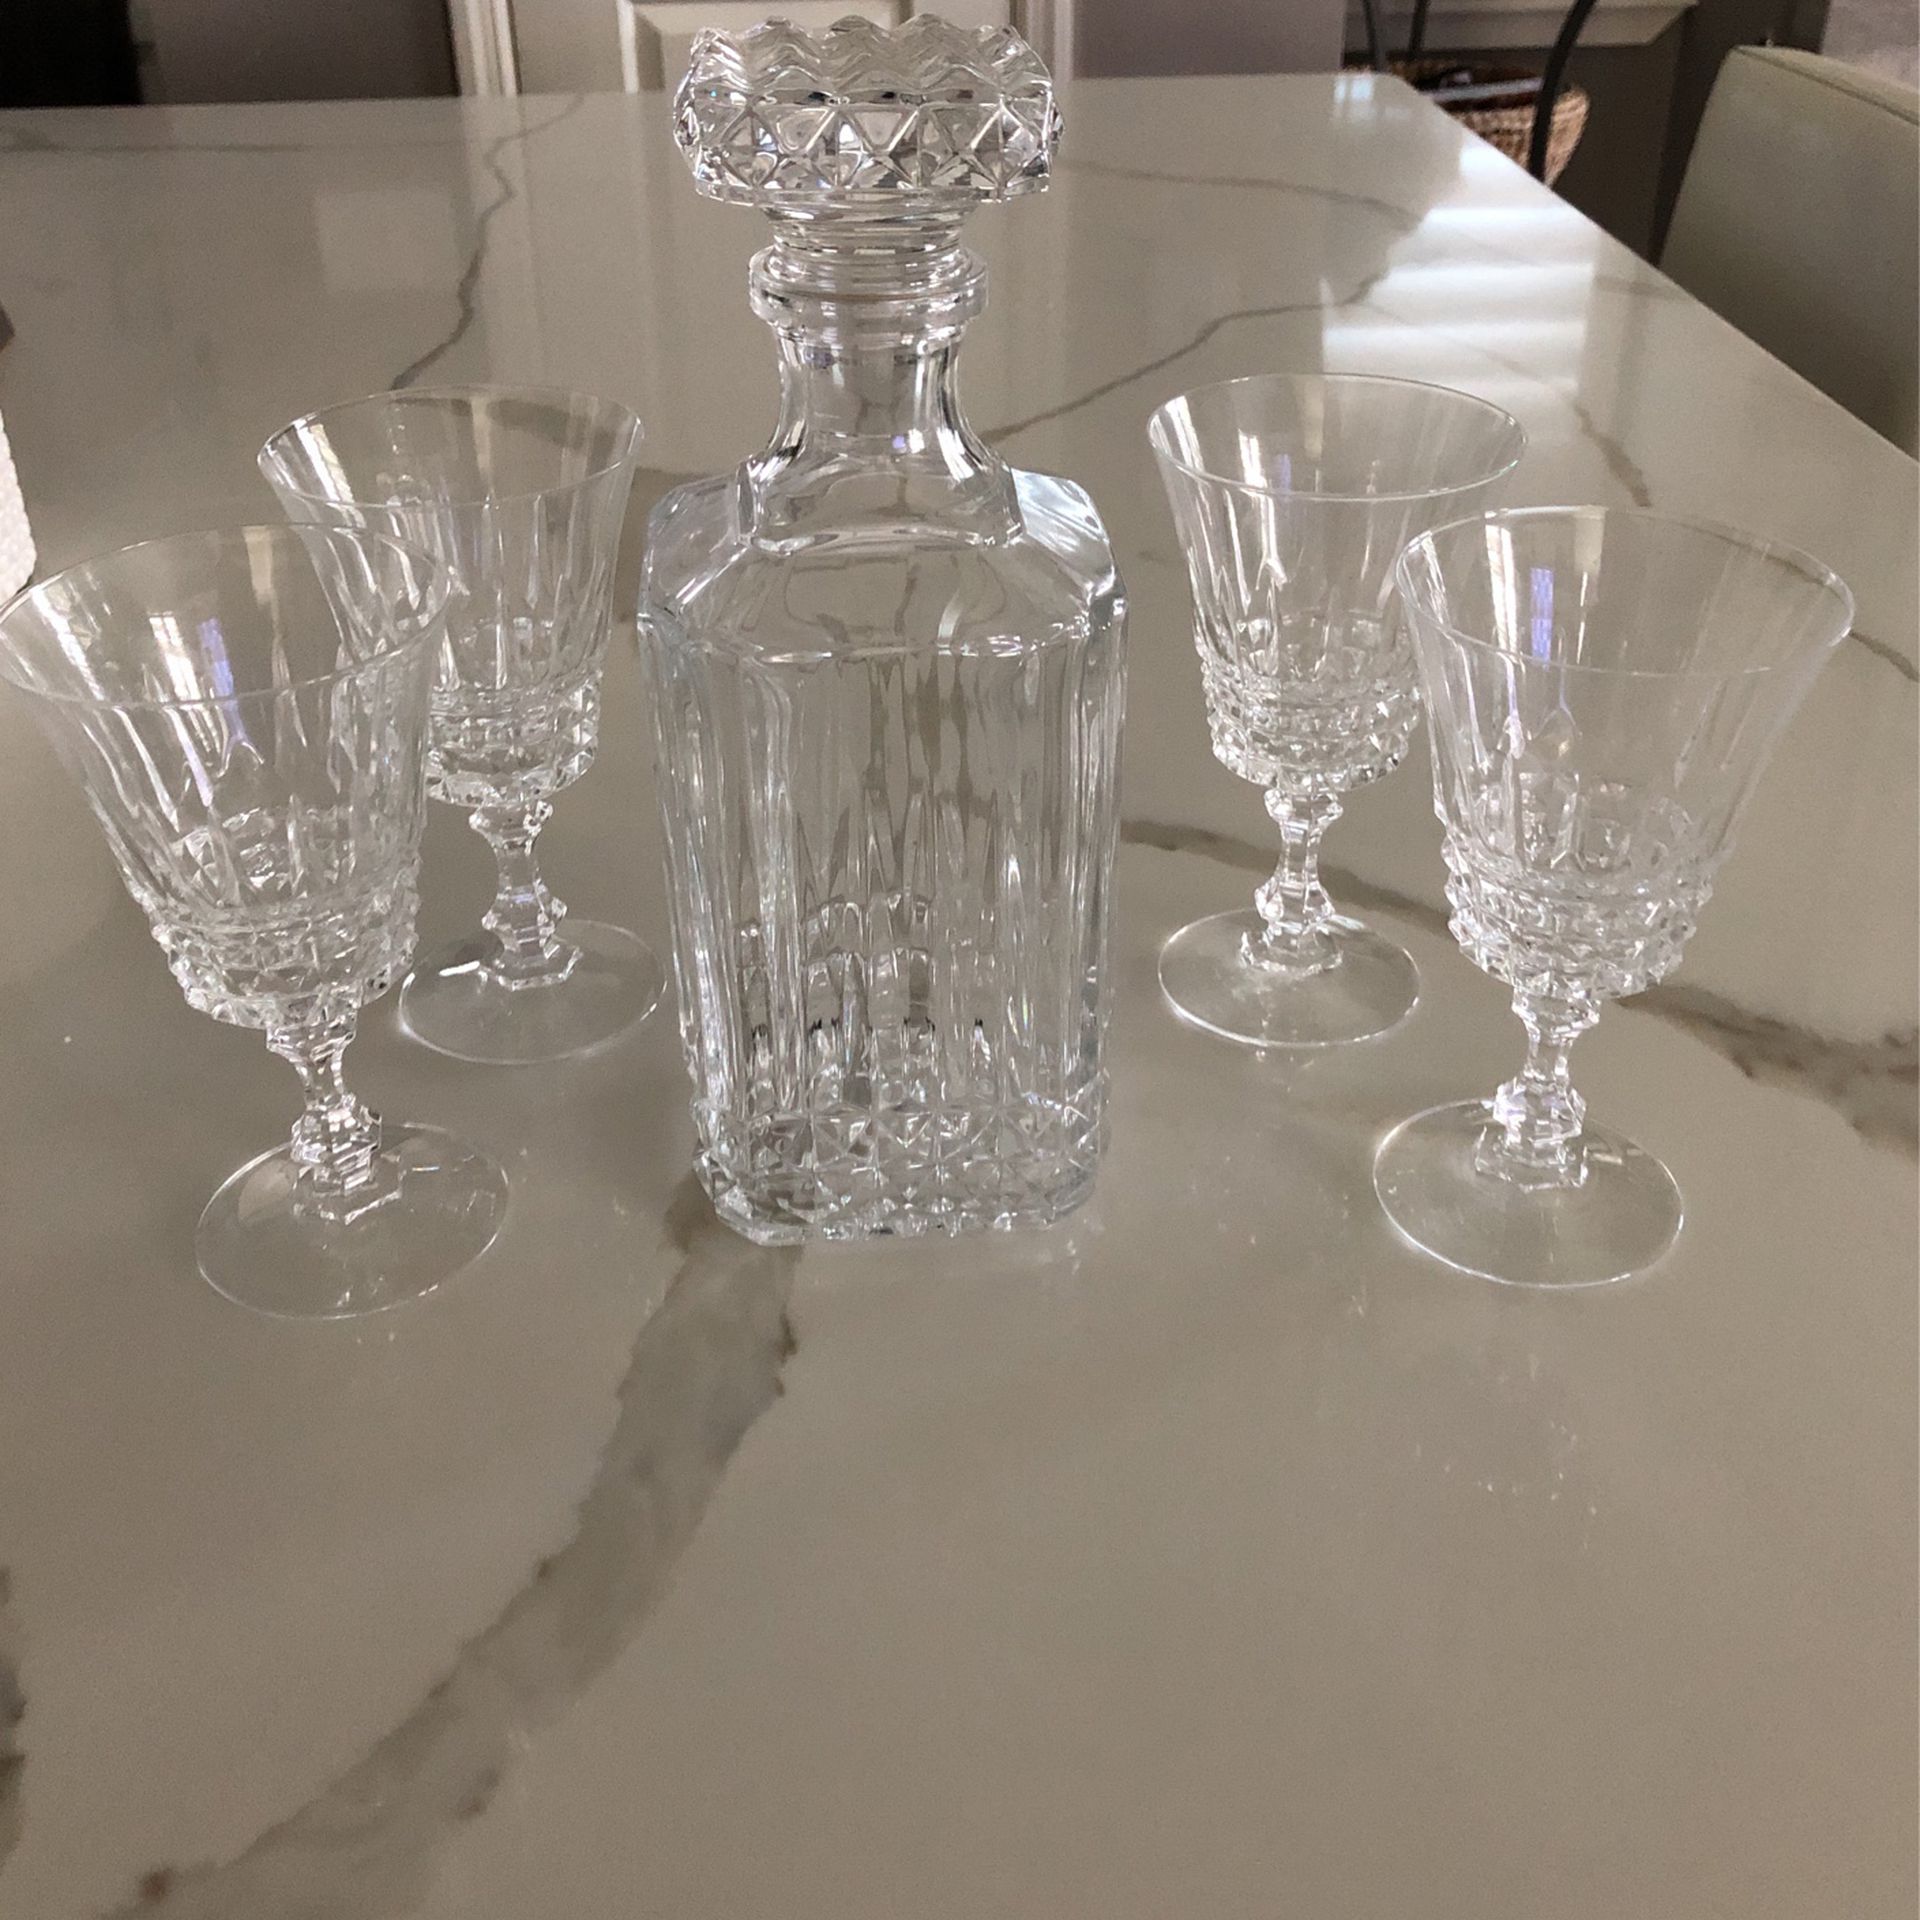 Decanter And Four Crystal Glasses